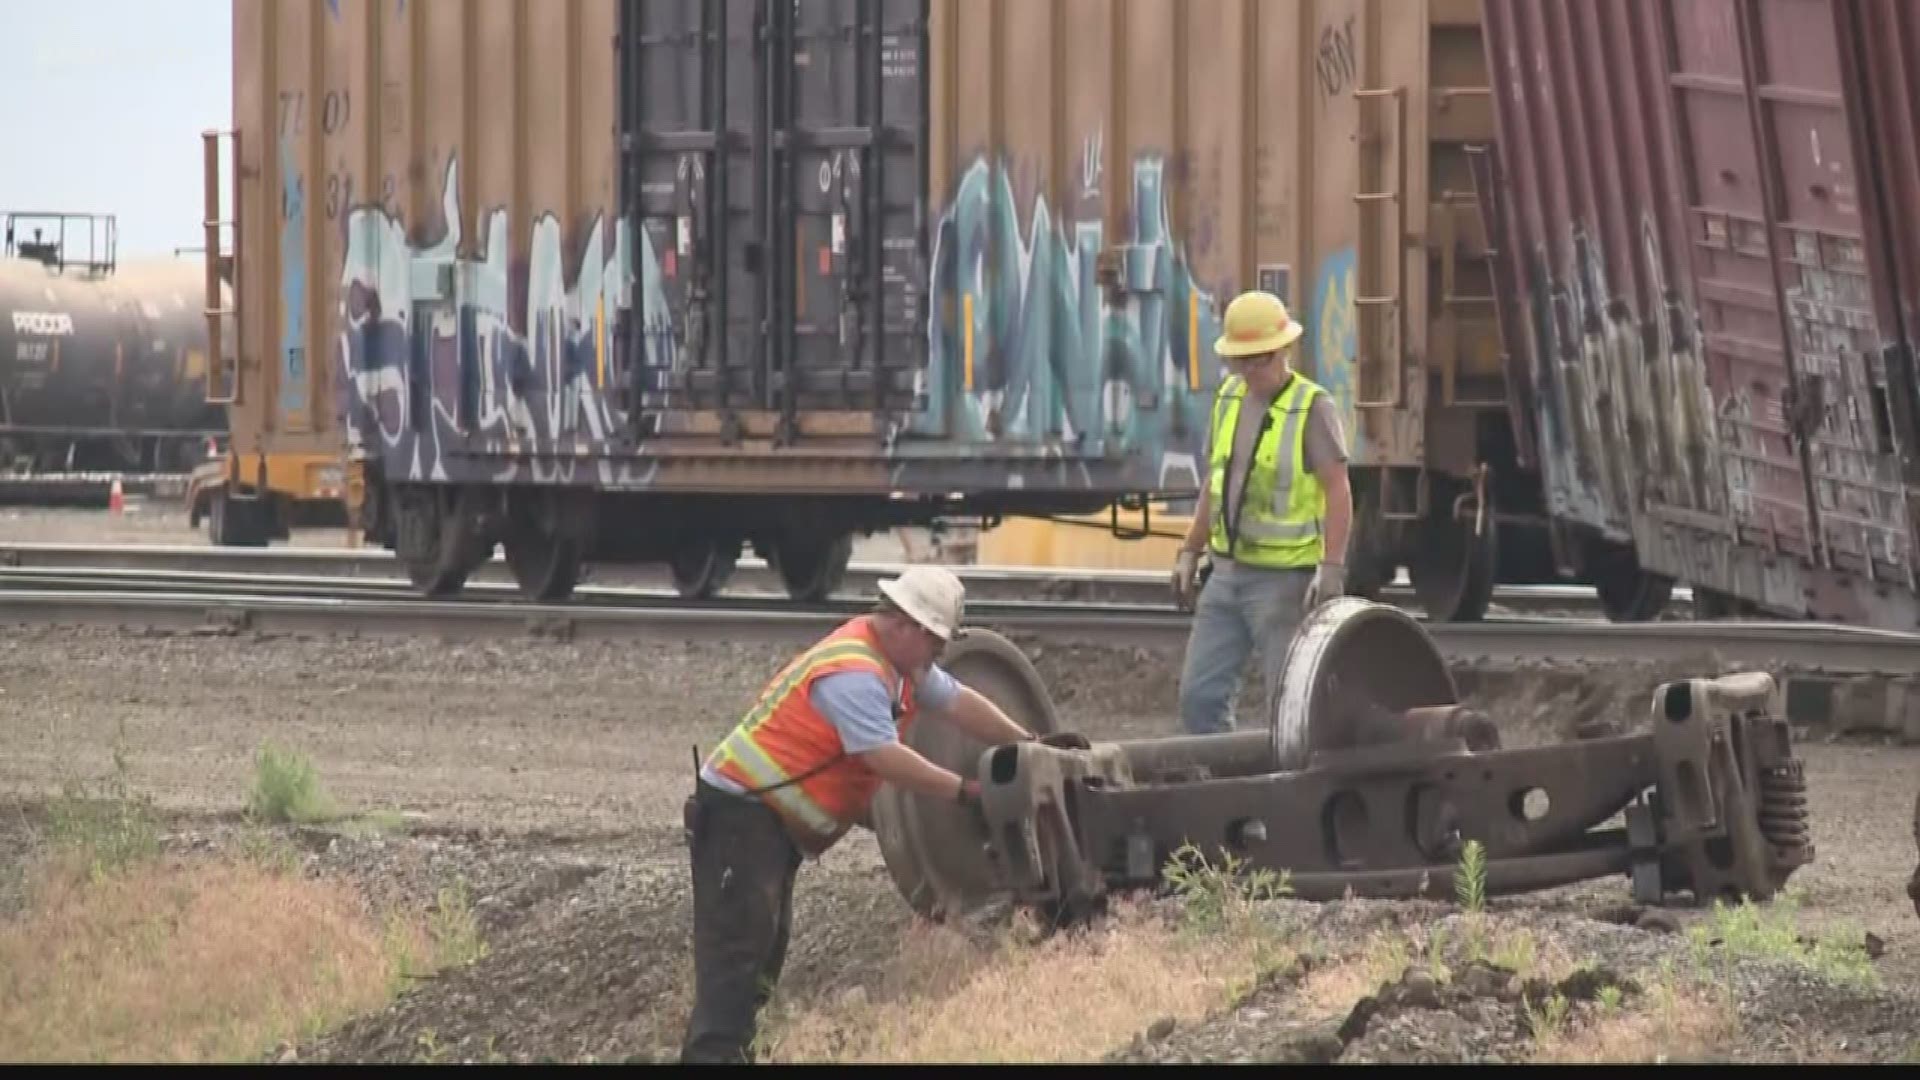 A Union Pacific Spokesperson said the derailment happened at about 6:15 p.m. and no injuries occurred.